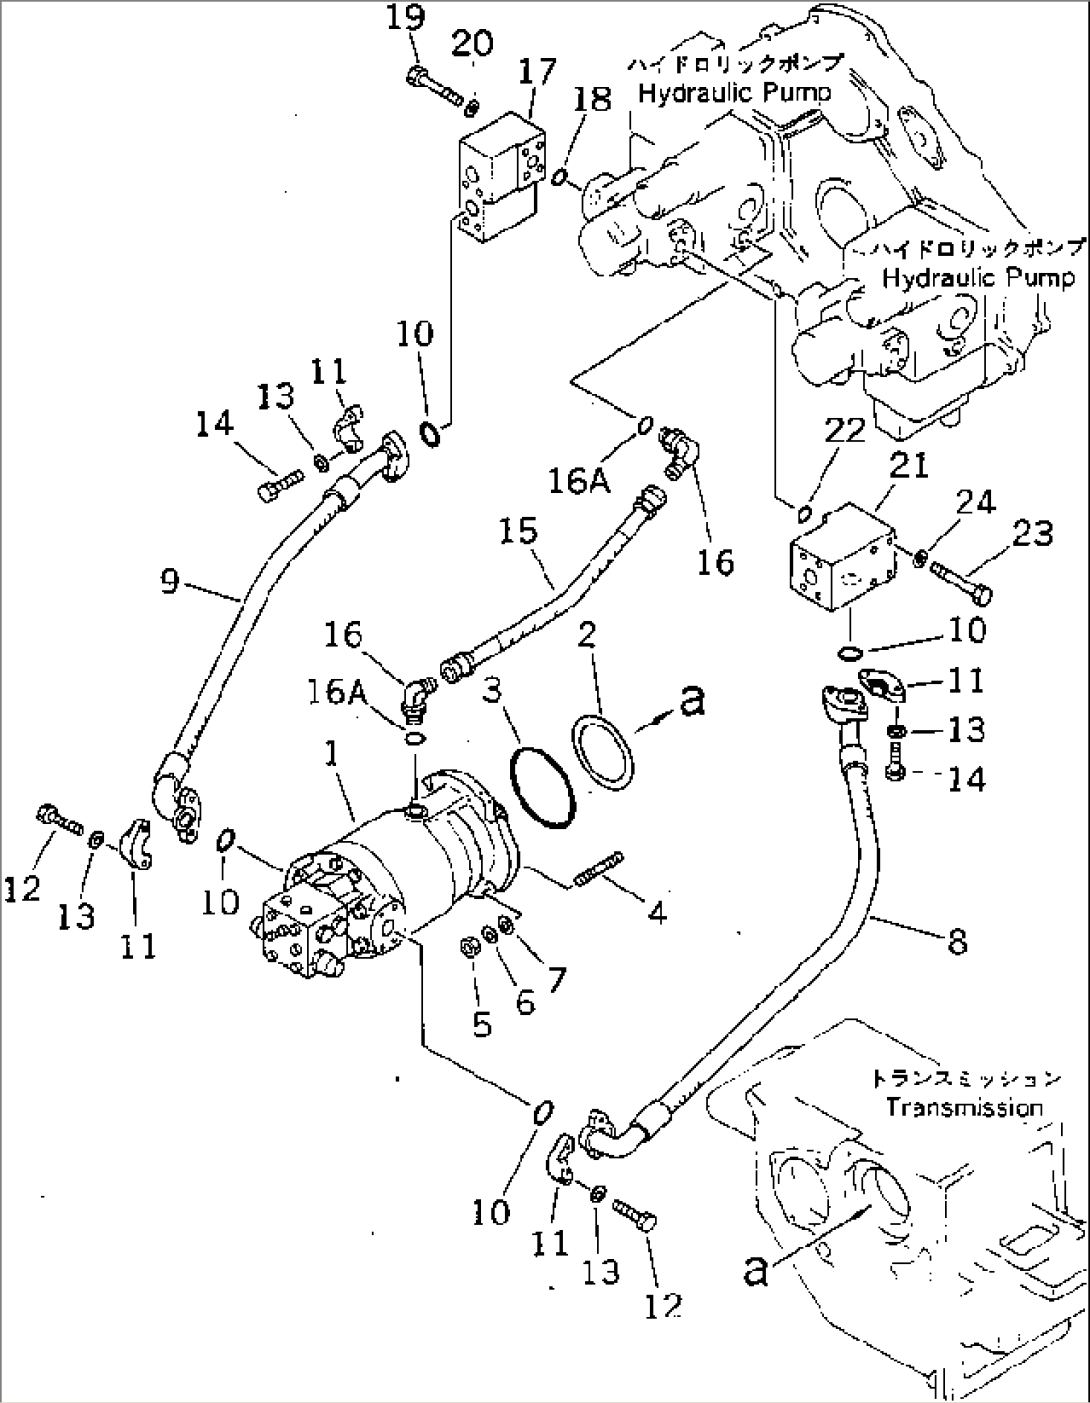 HYDRAULIC PIPING (TRAVEL PUMP TO REAR TRAVEL MOTOR)